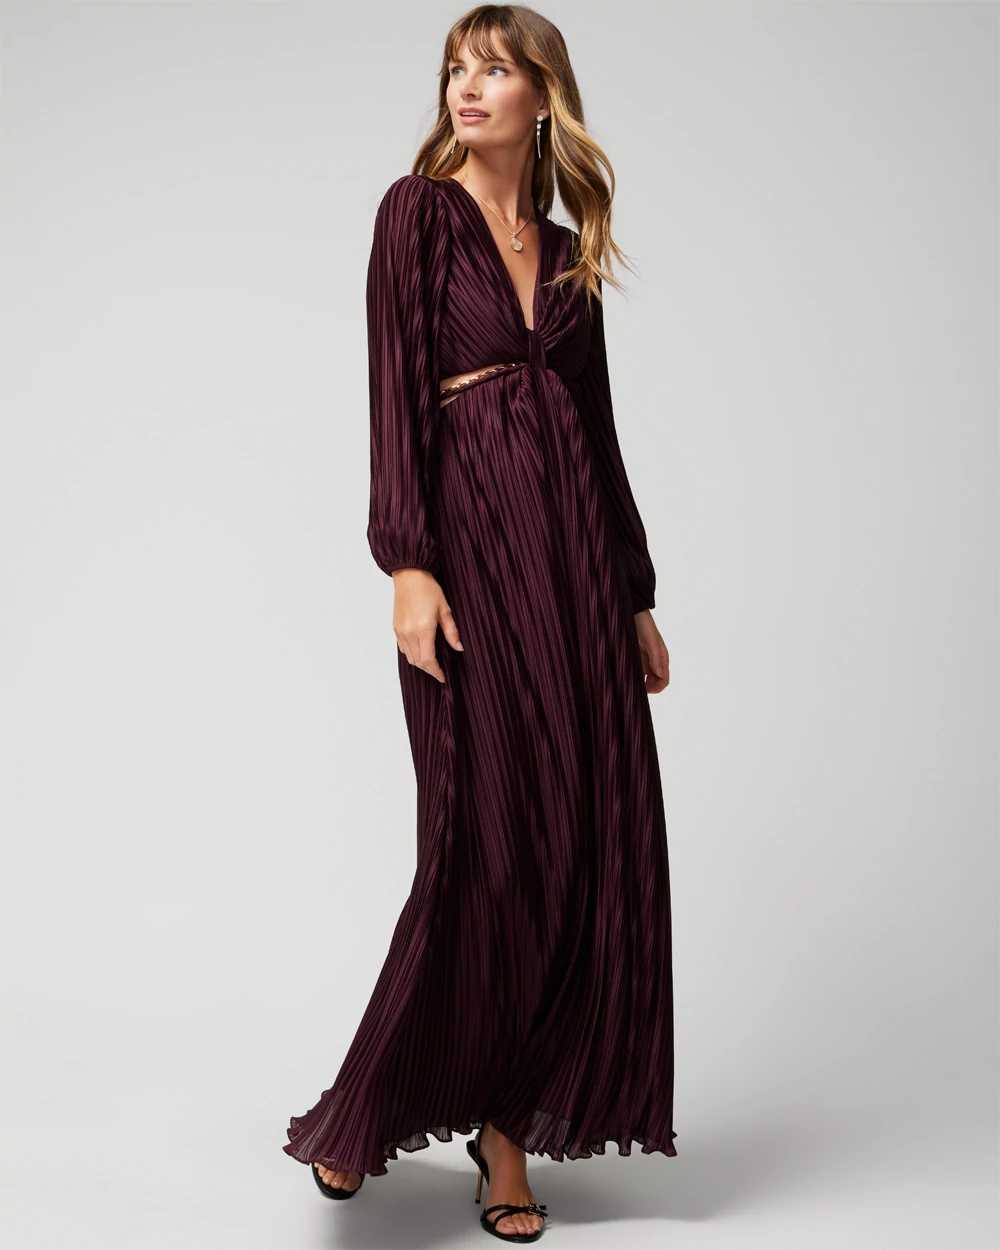 Petite Long Sleeve Chain Cutout Maxi Dress click to view larger image.